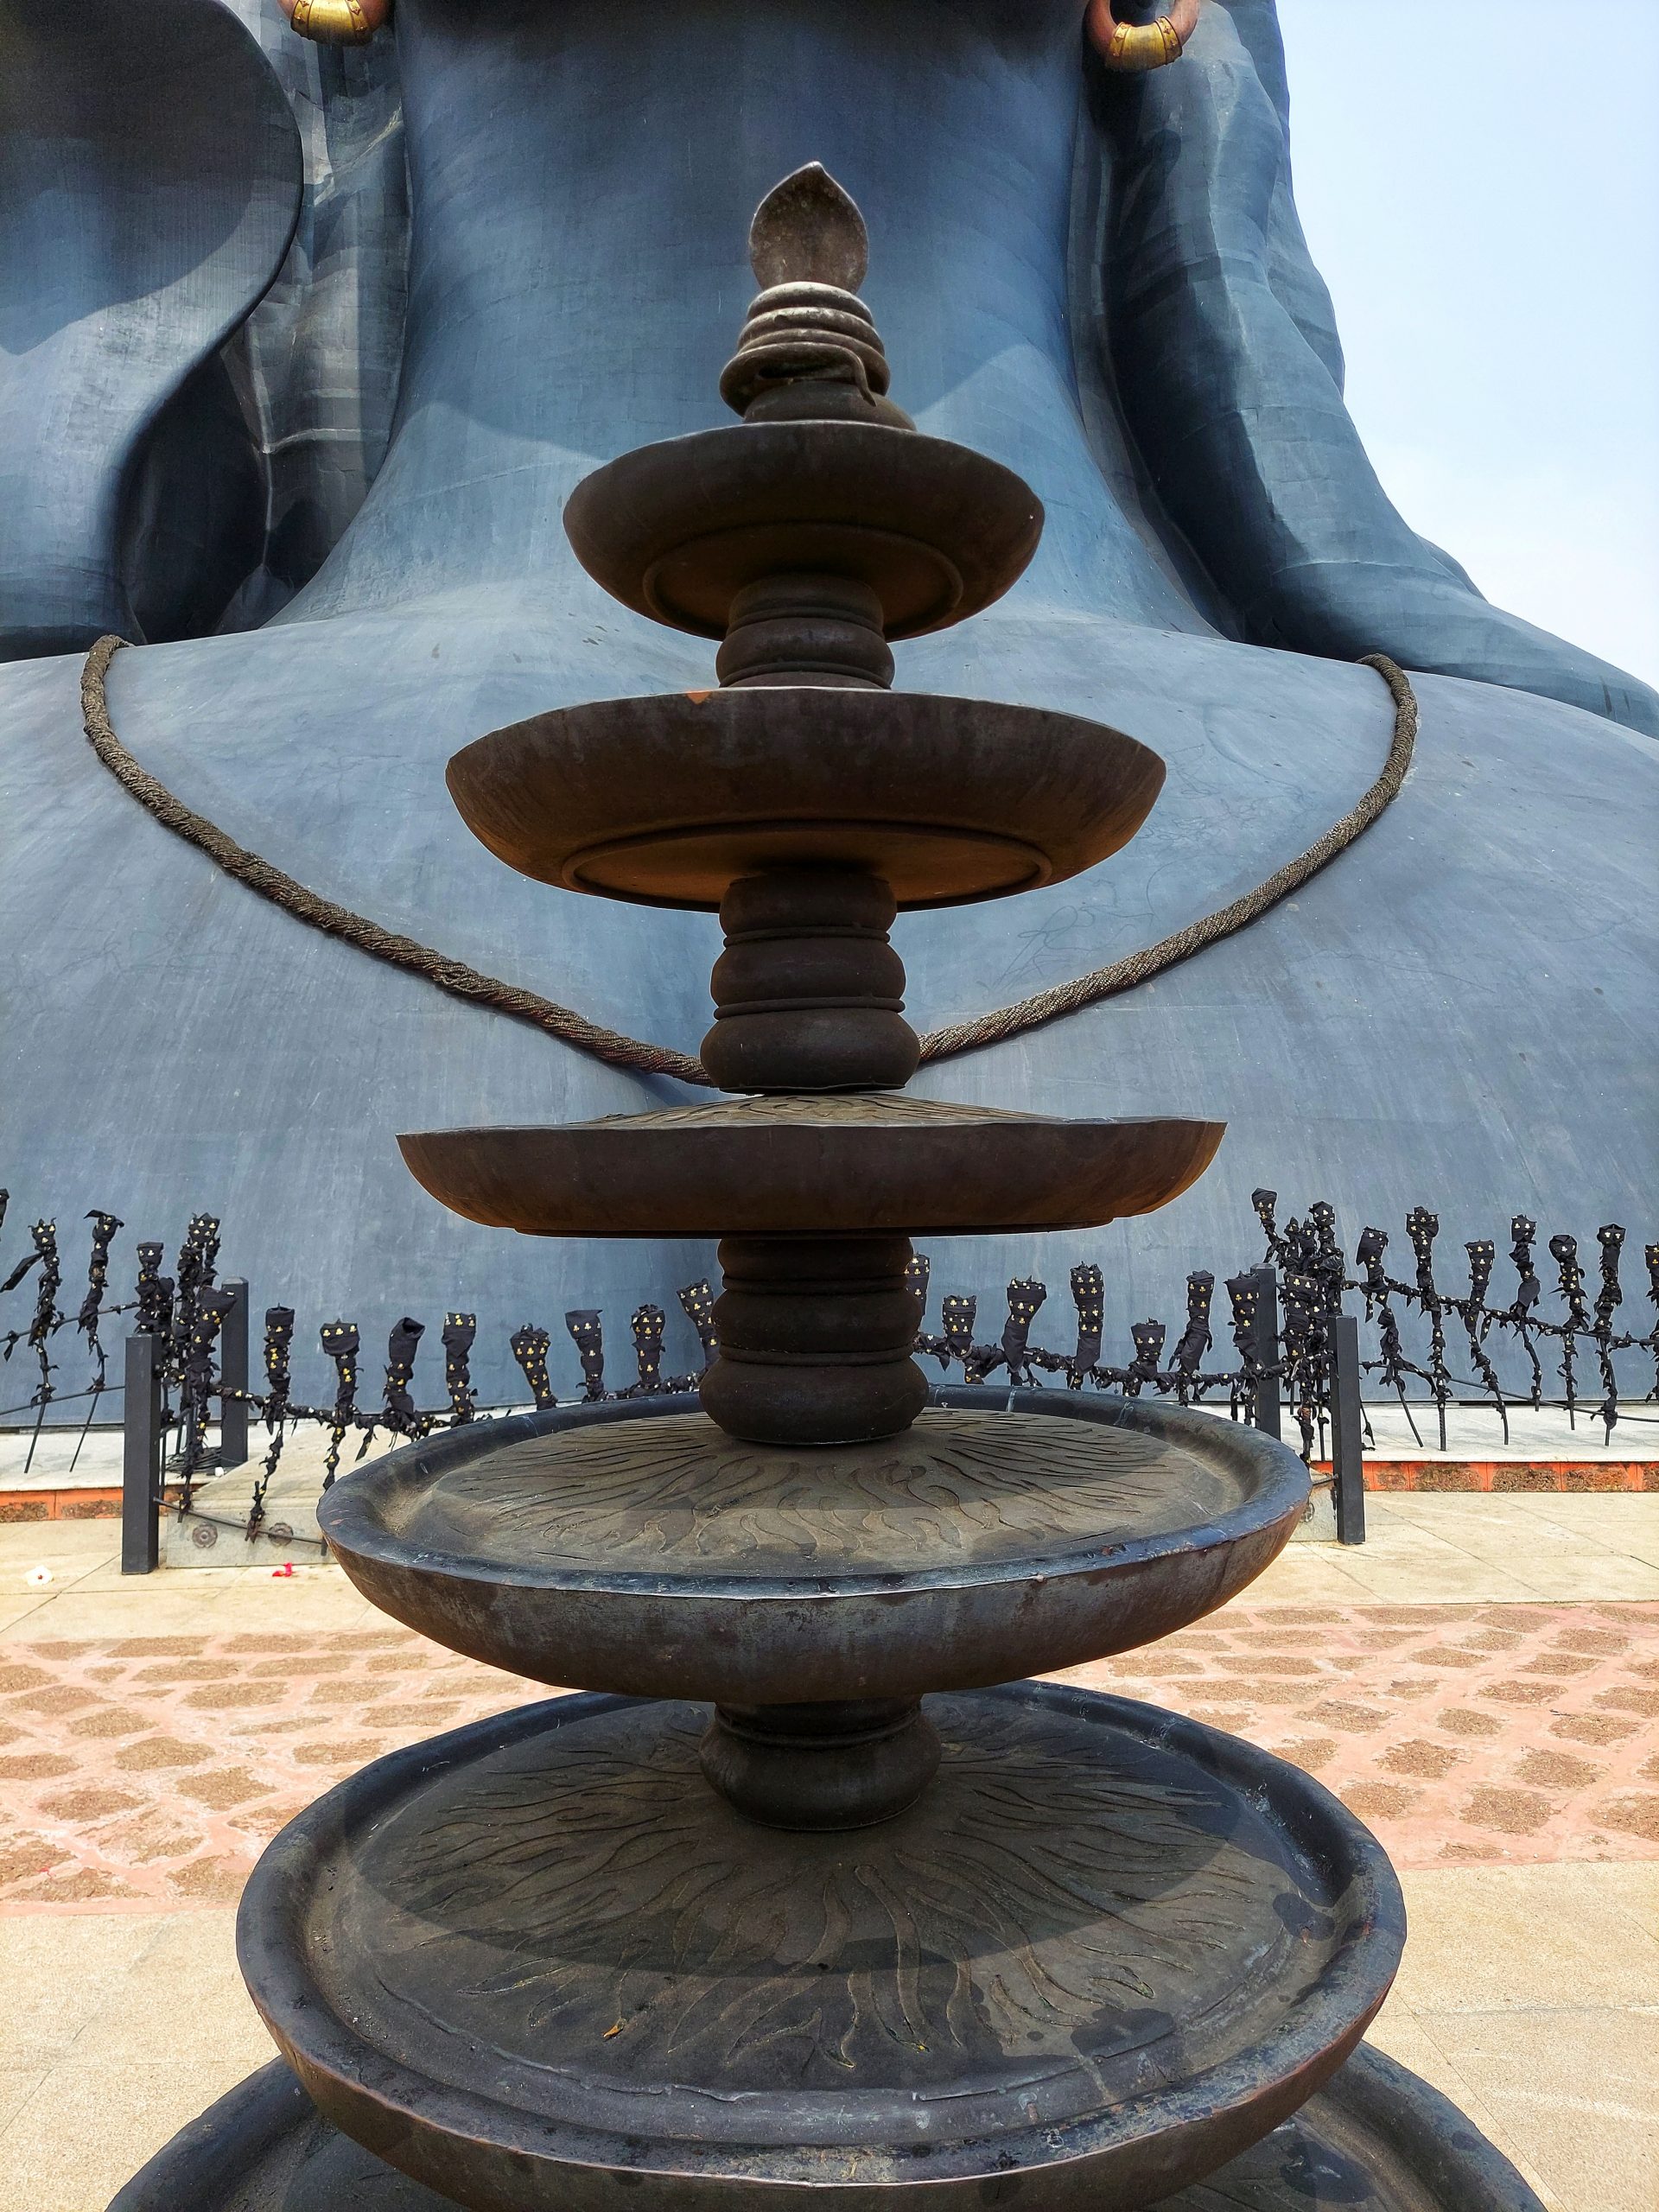 Iron lamp in front of Lord Shiva statue